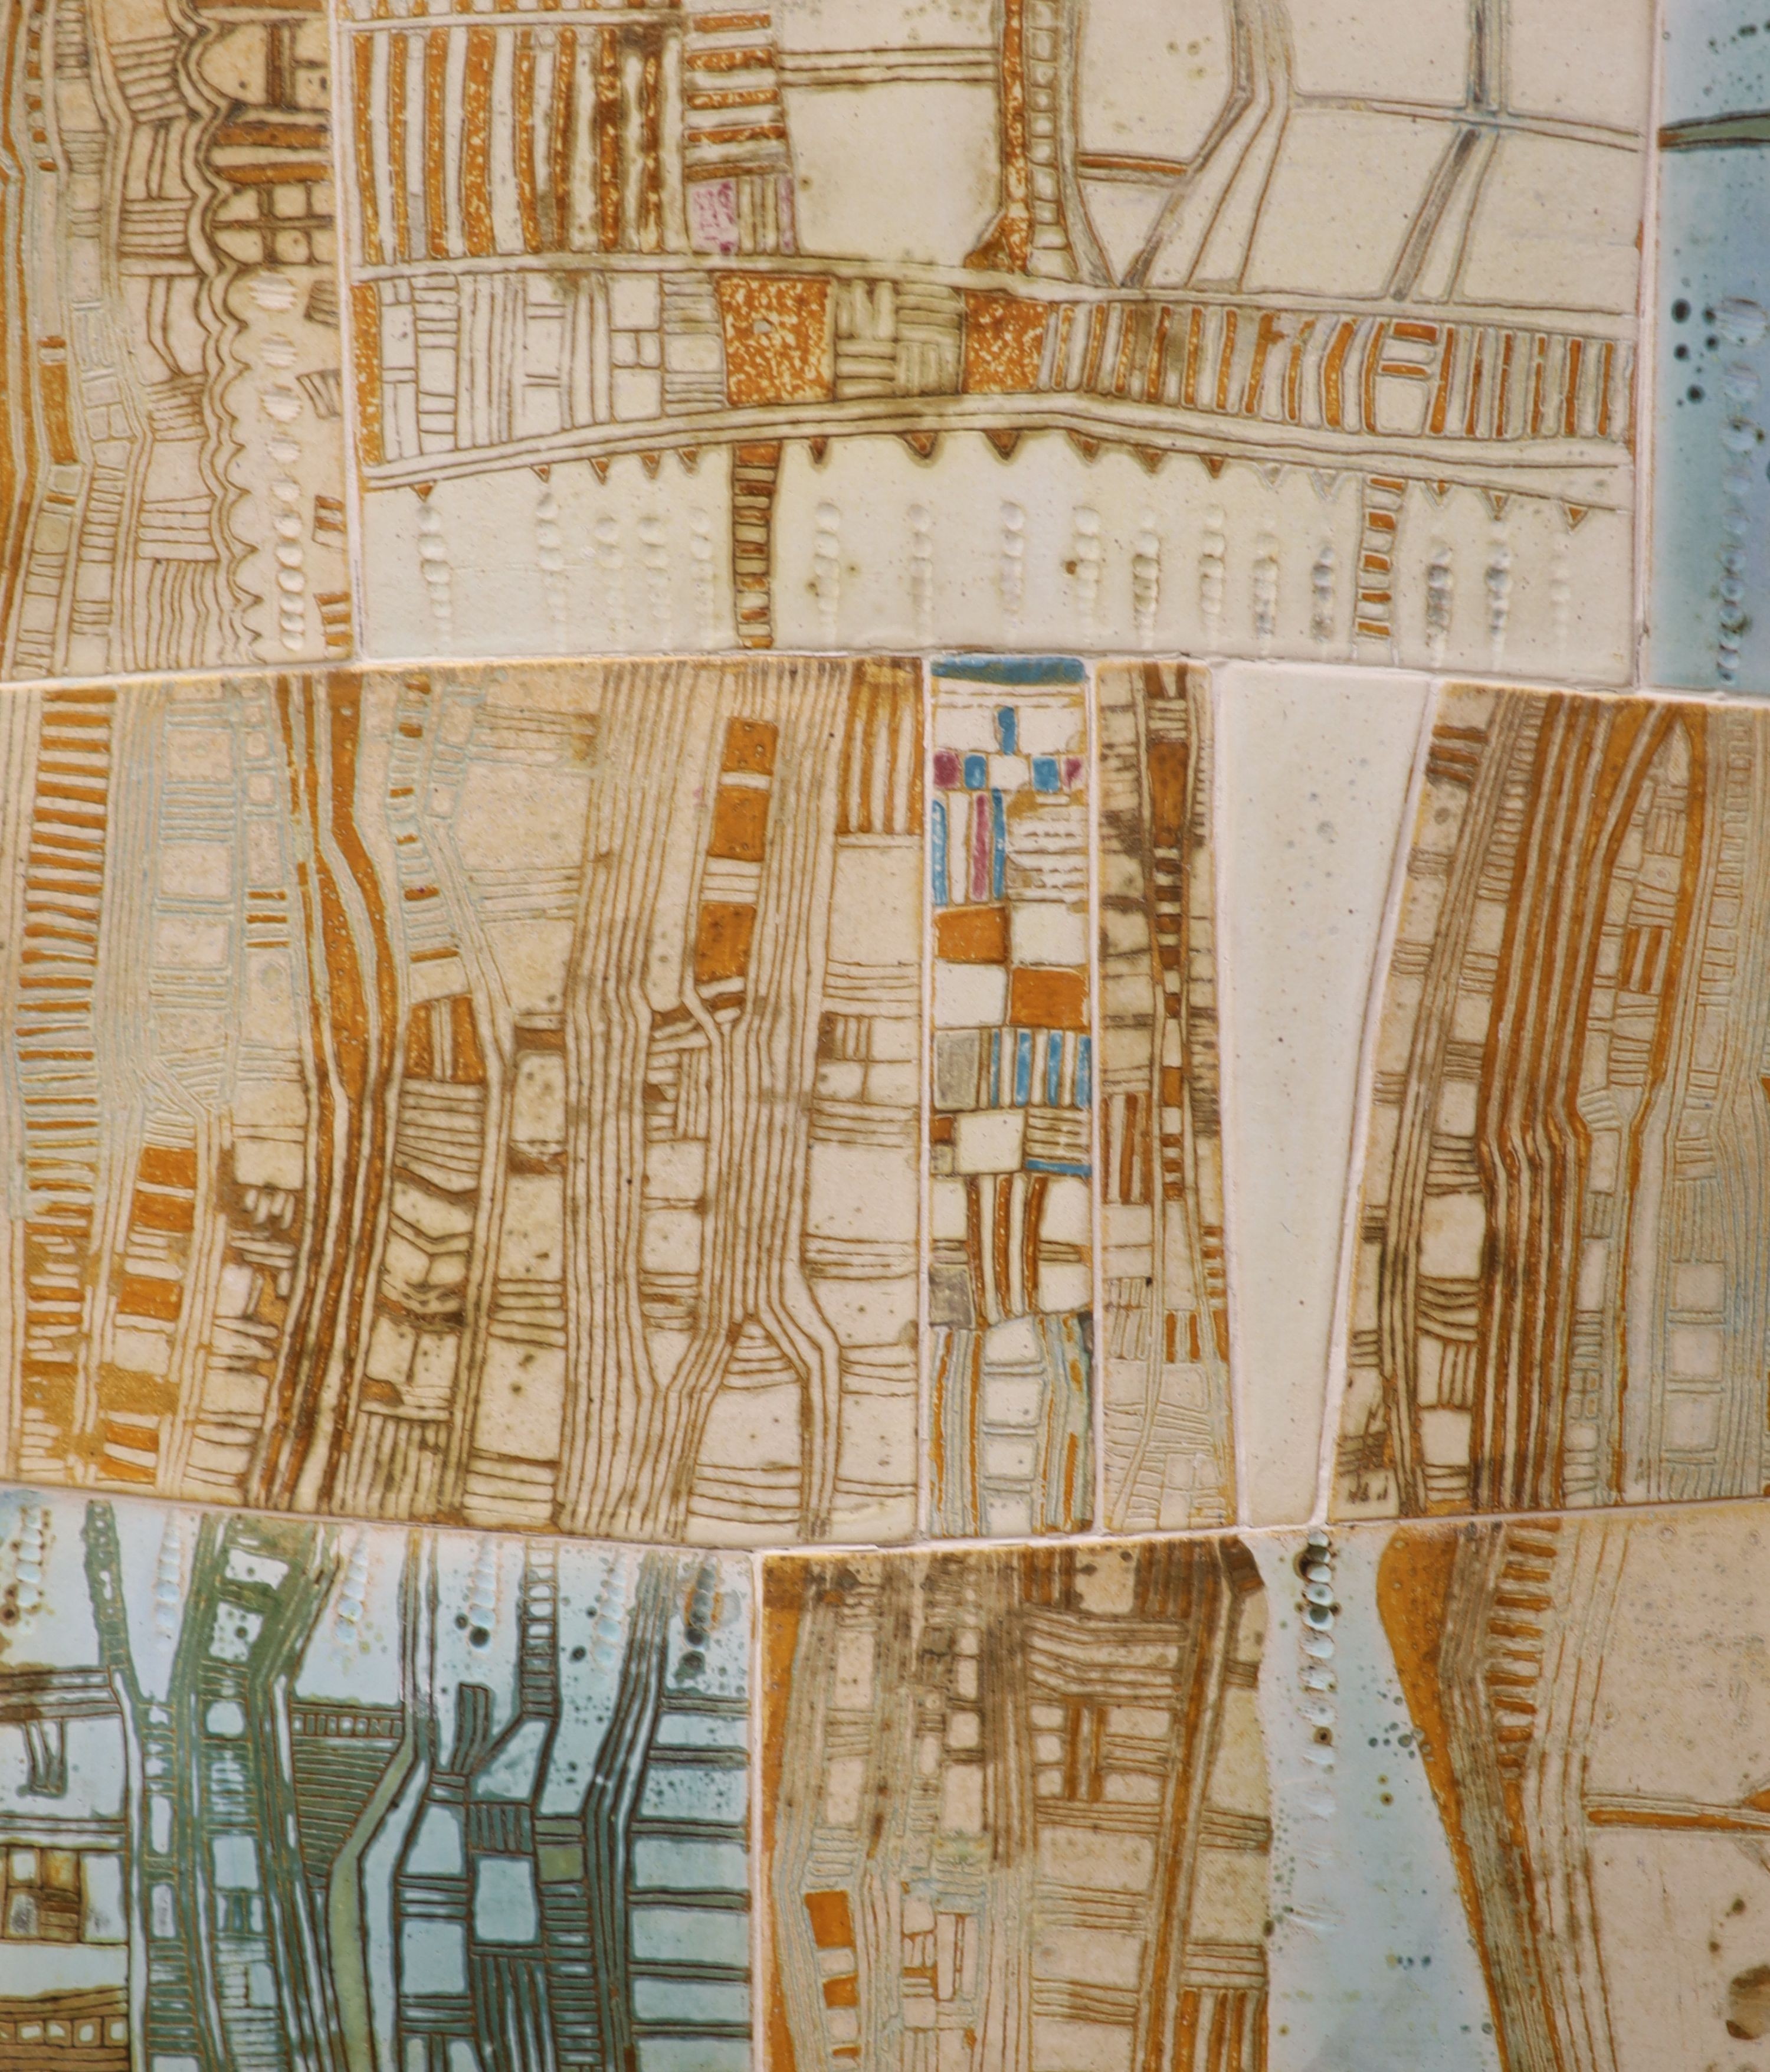 Linda John, 'Urbane Landscape', stoneware tiles with incised decoration in pale blue, brown and orange, Gallery on The Green label verso, signed and dated '98 verso, 44cm x 38cm